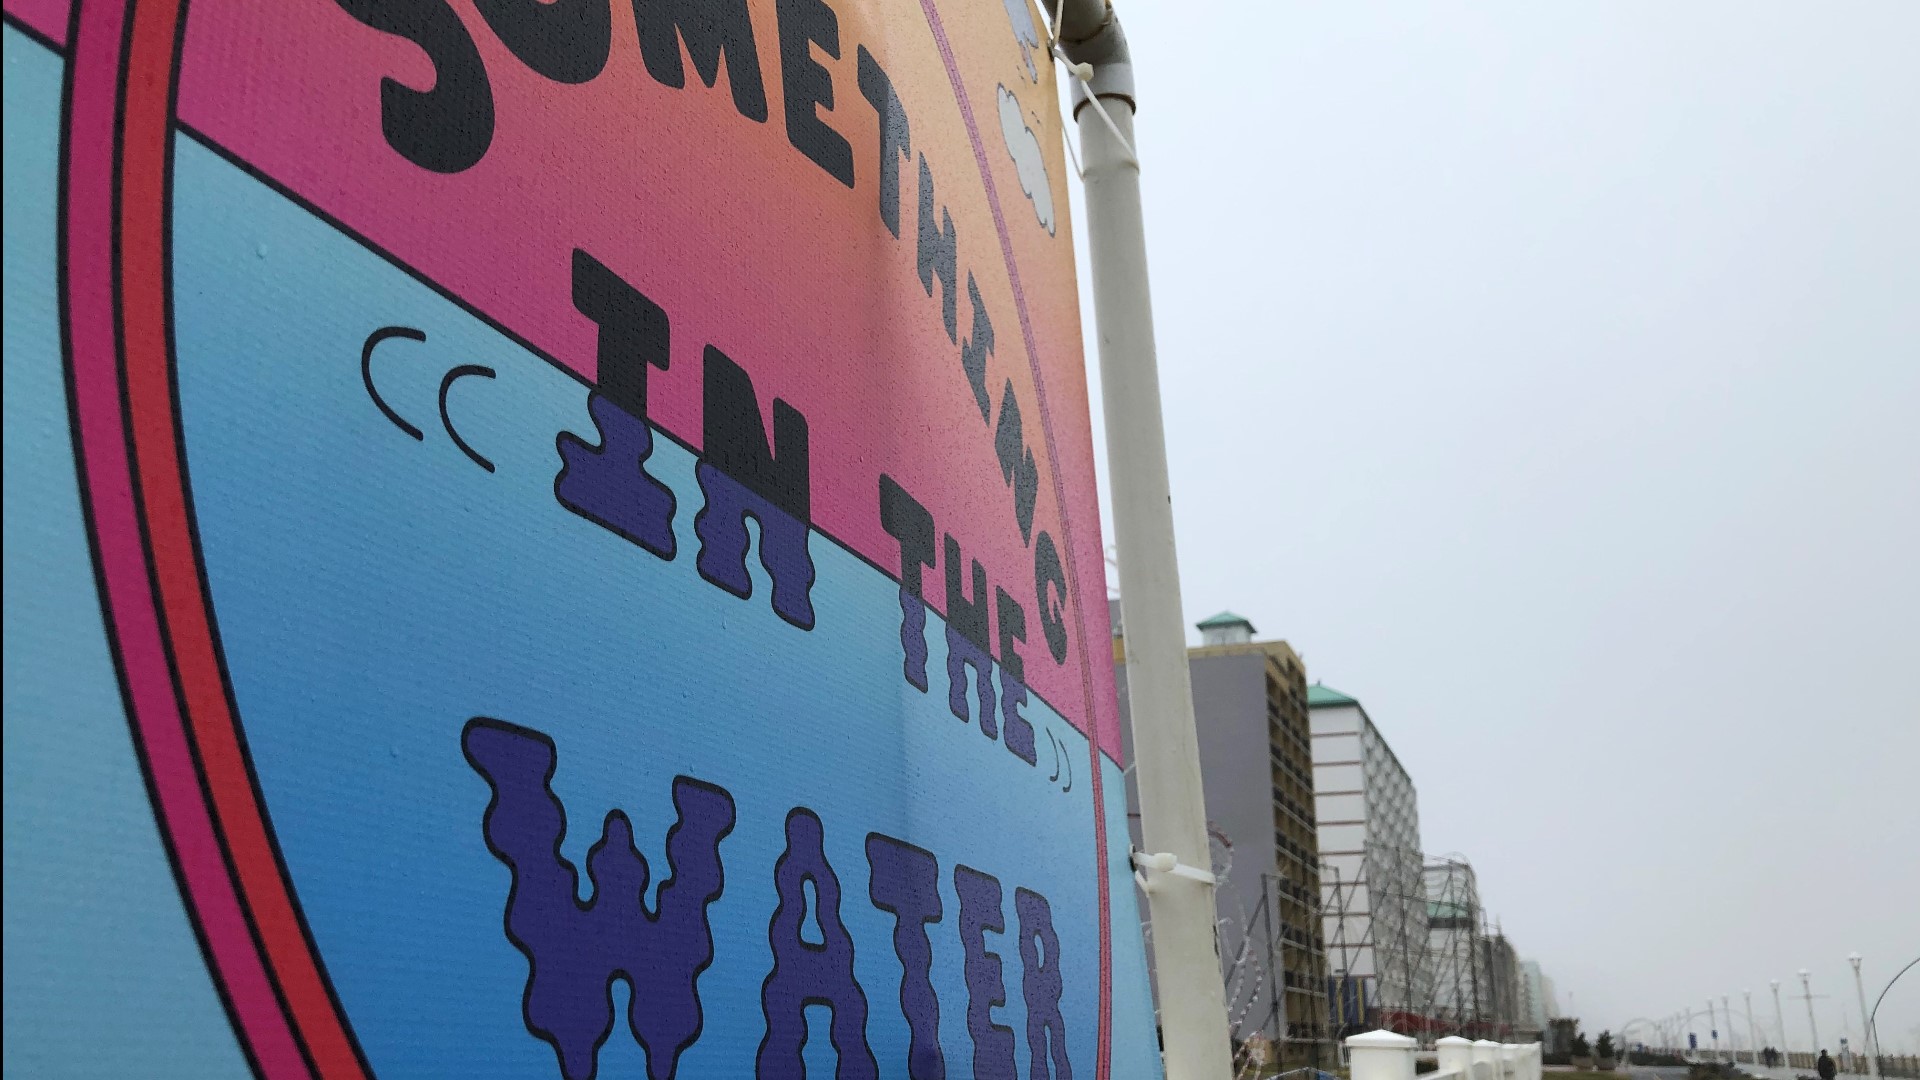 The COVID-19 pandemic has scrapped Pharrell Williams' Something in the Water Festival at the Virginia Beach Oceanfront for the second year in a row.